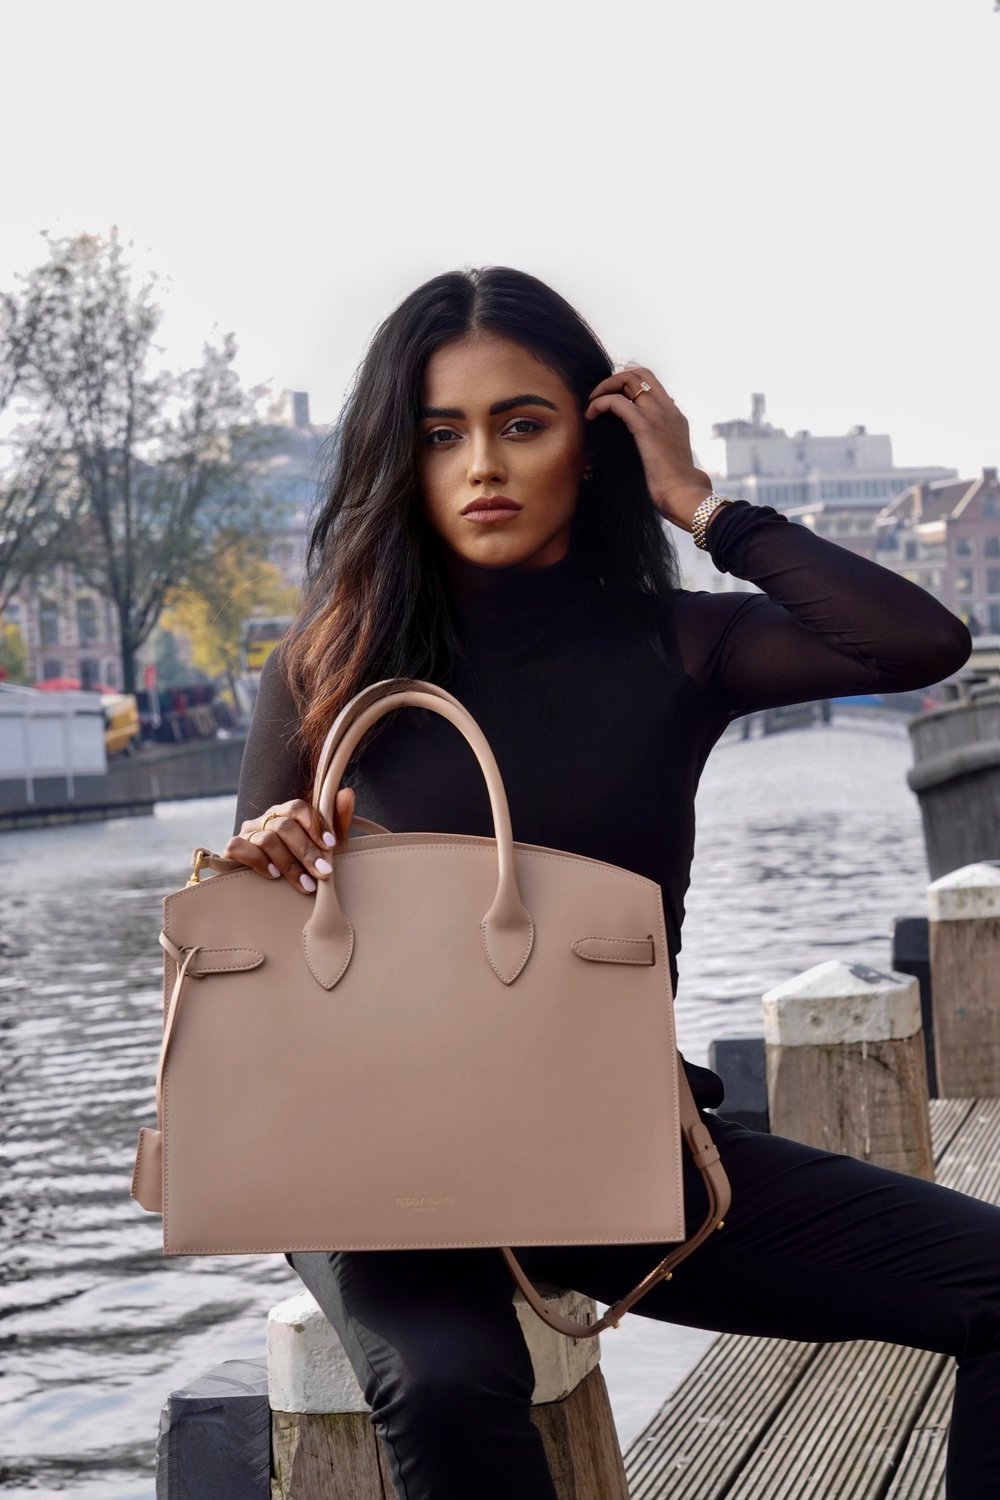 Close up of sachini sitting next to a canal in Amsterdam wearing a black top and holding a beige Teddy Blake bag